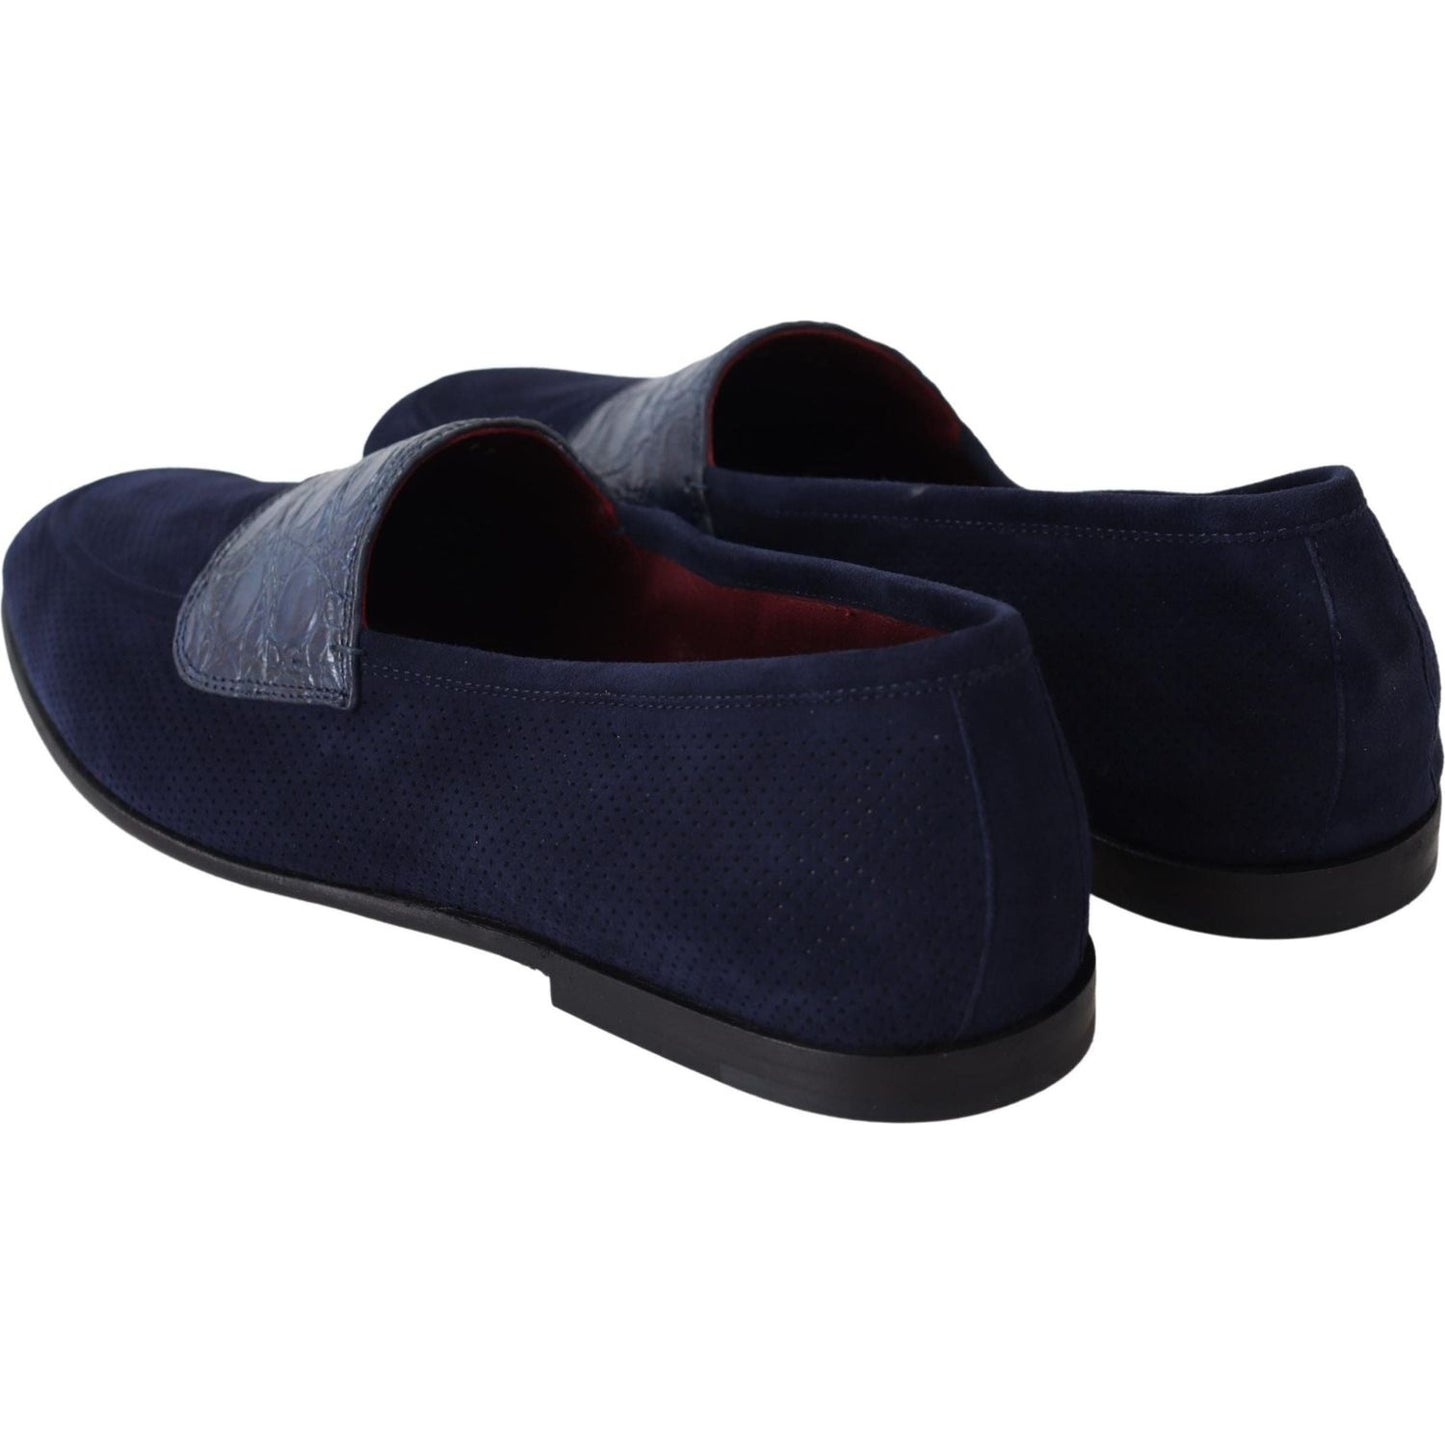 Dolce & Gabbana Elegant Blue Suede Leather Loafers blue-suede-caiman-loafers-slippers-shoes IMG_1592-scaled-b8c7348f-35c.jpg